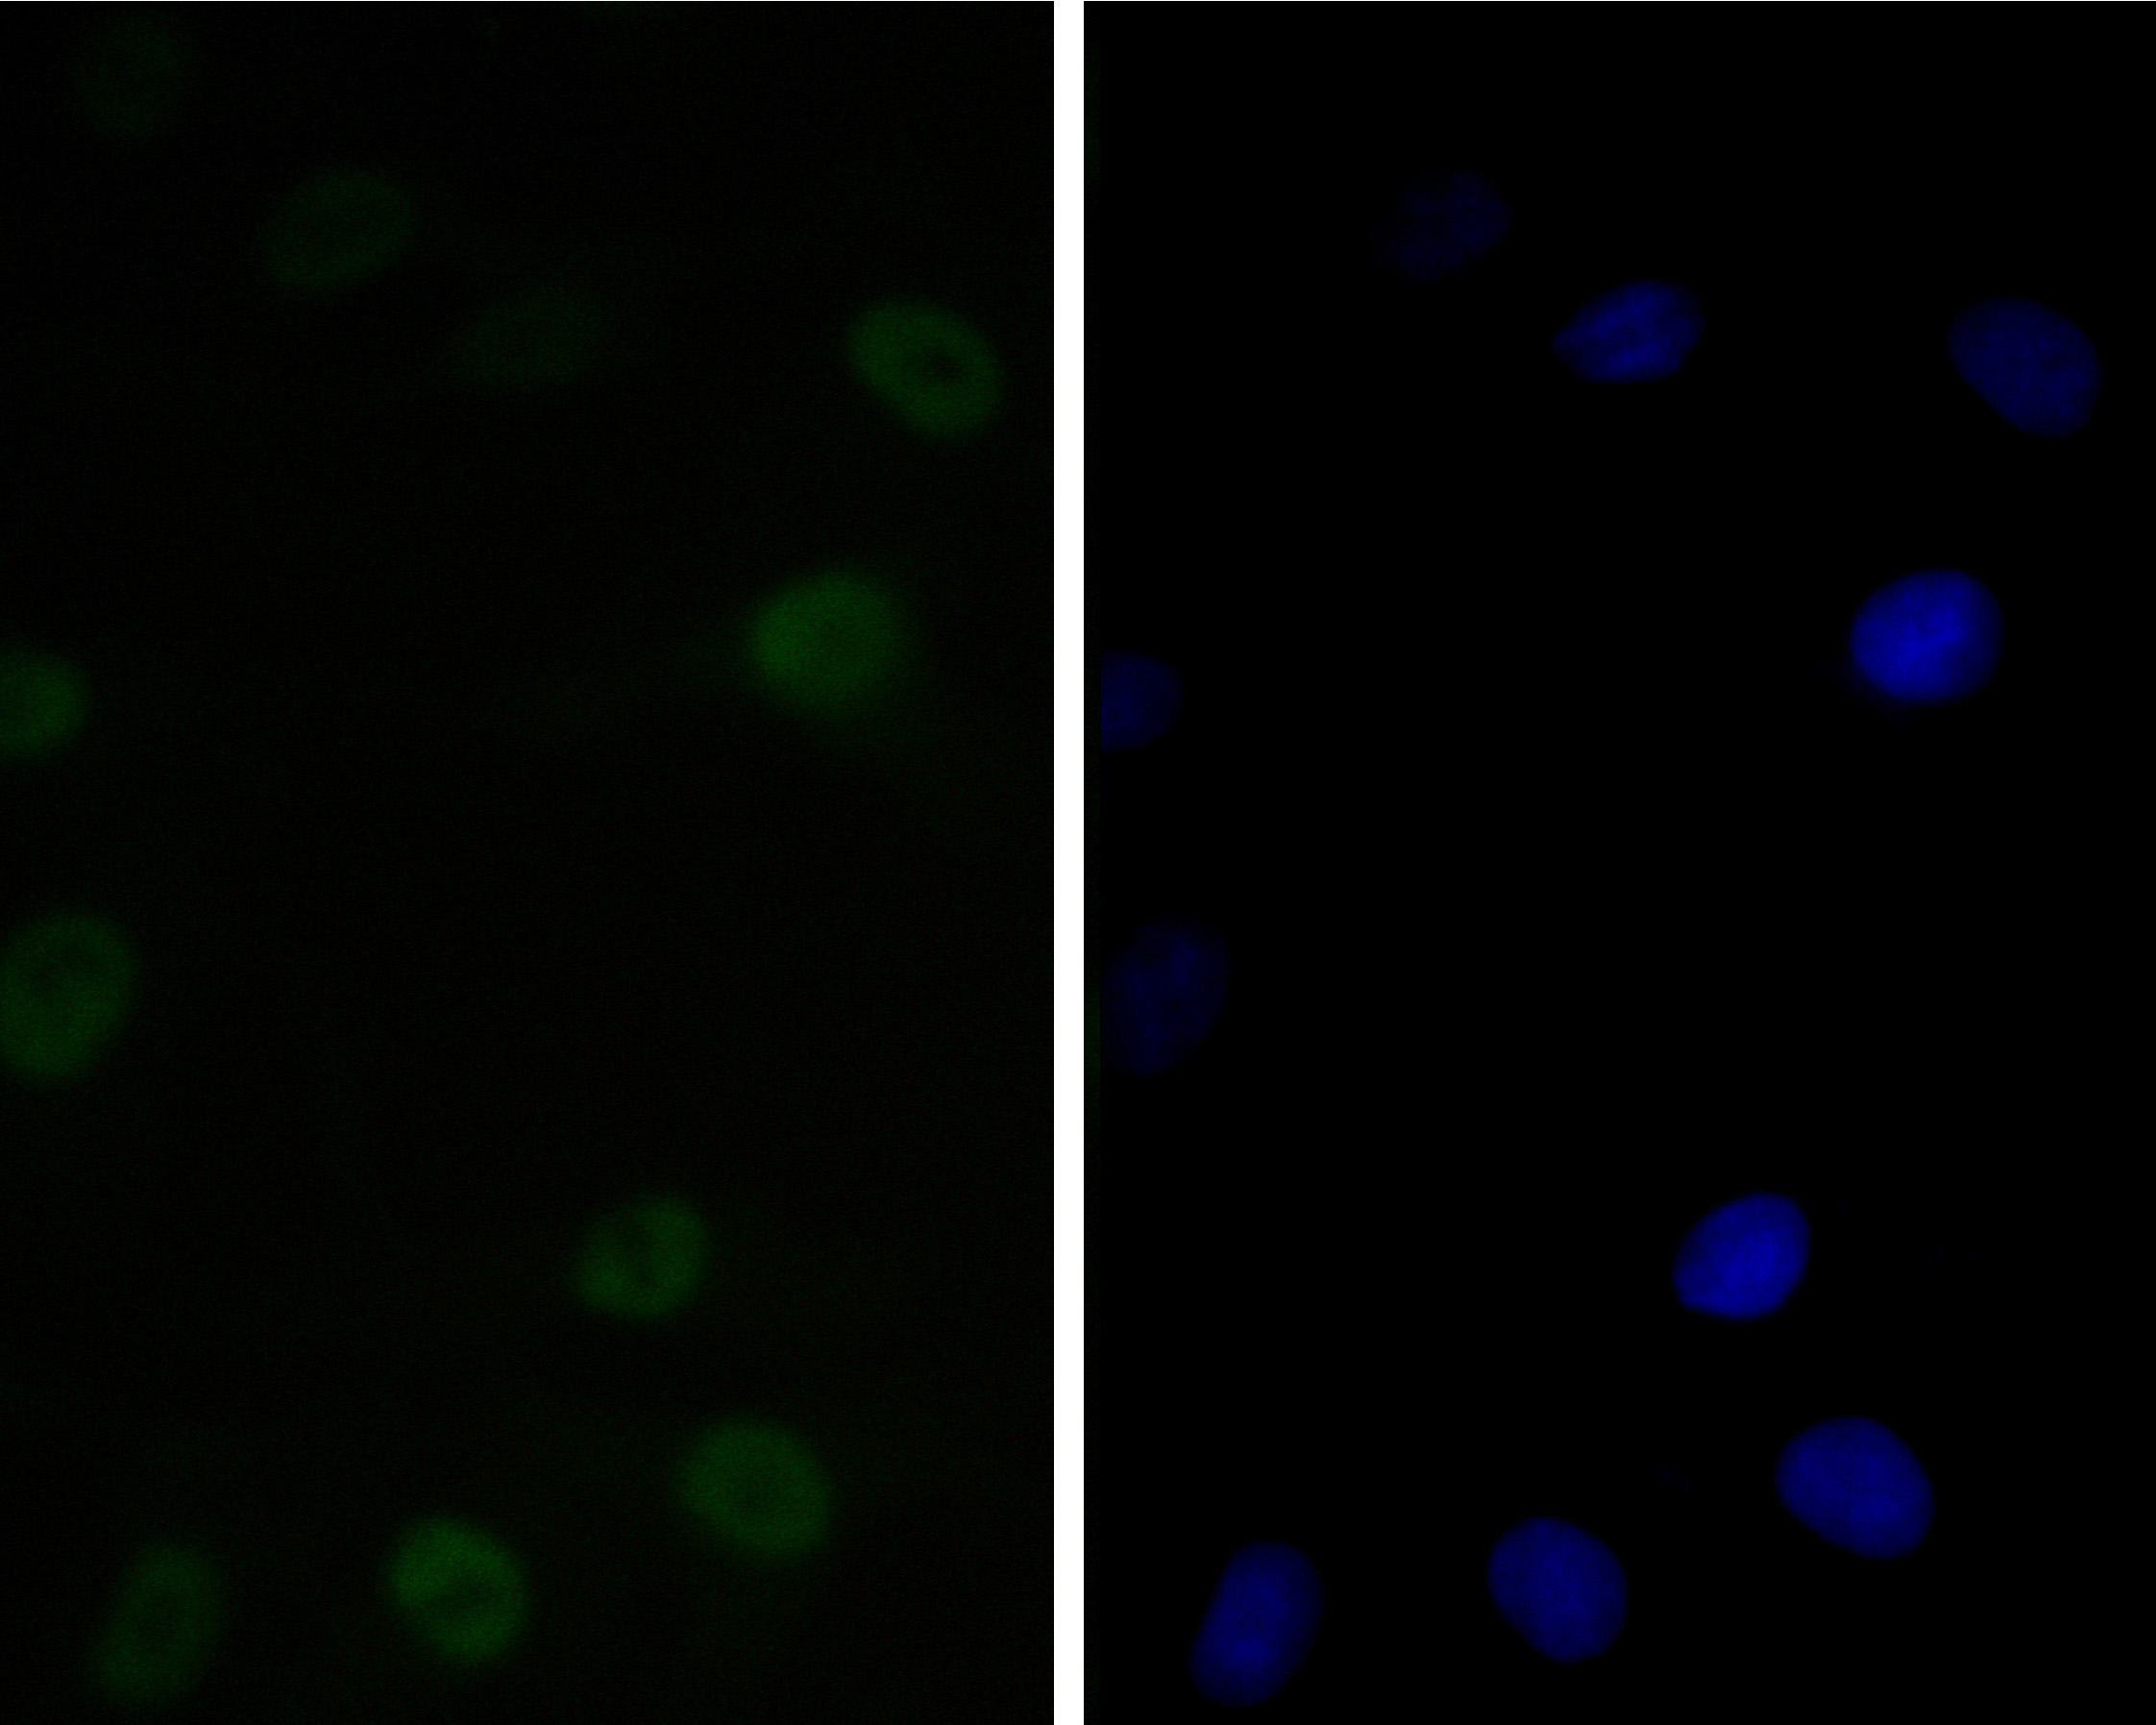 ICC staining of CTBP2 in A549 cells (green). Formalin fixed cells were permeabilized with 0.1% Triton X-100 in TBS for 10 minutes at room temperature and blocked with 1% Blocker BSA for 15 minutes at room temperature. Cells were probed with the primary antibody (ET7111-27, 1/50) for 1 hour at room temperature, washed with PBS. Alexa Fluor®488 Goat anti-Rabbit IgG was used as the secondary antibody at 1/1,000 dilution. The nuclear counter stain is DAPI (blue).